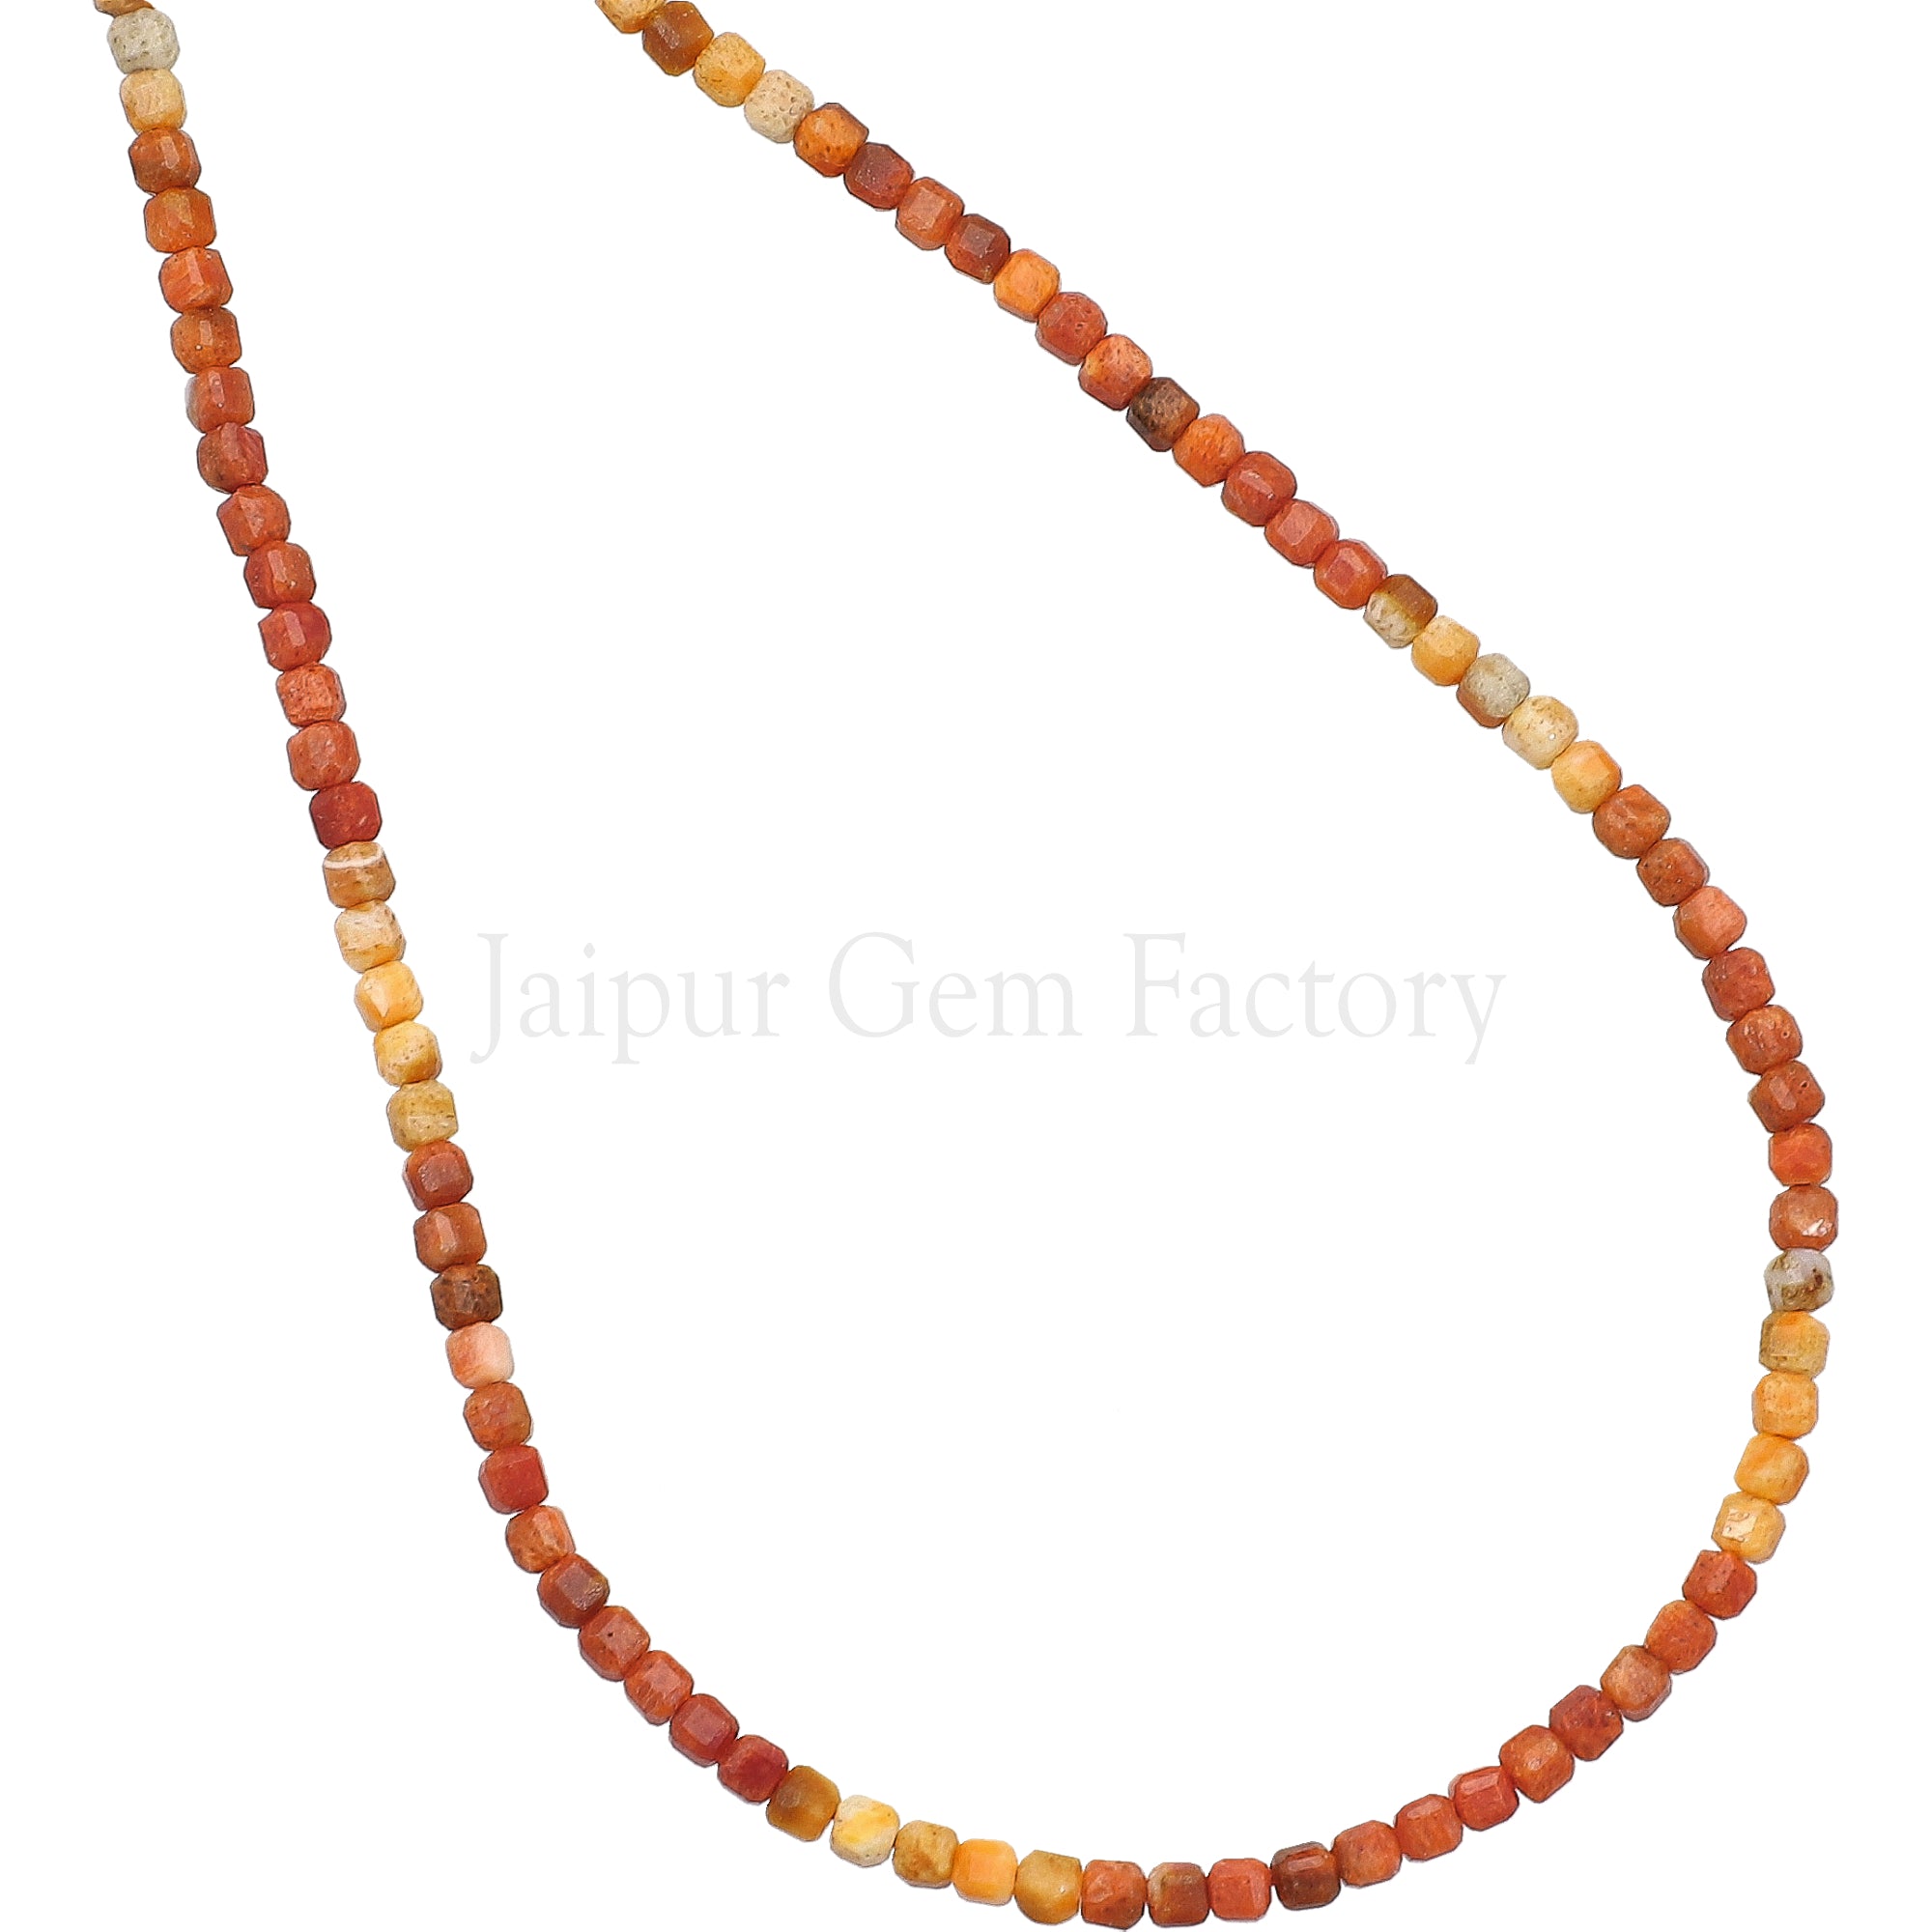 2.5 MM Dyed Coral Faceted Box Beads 15 Inches Strand